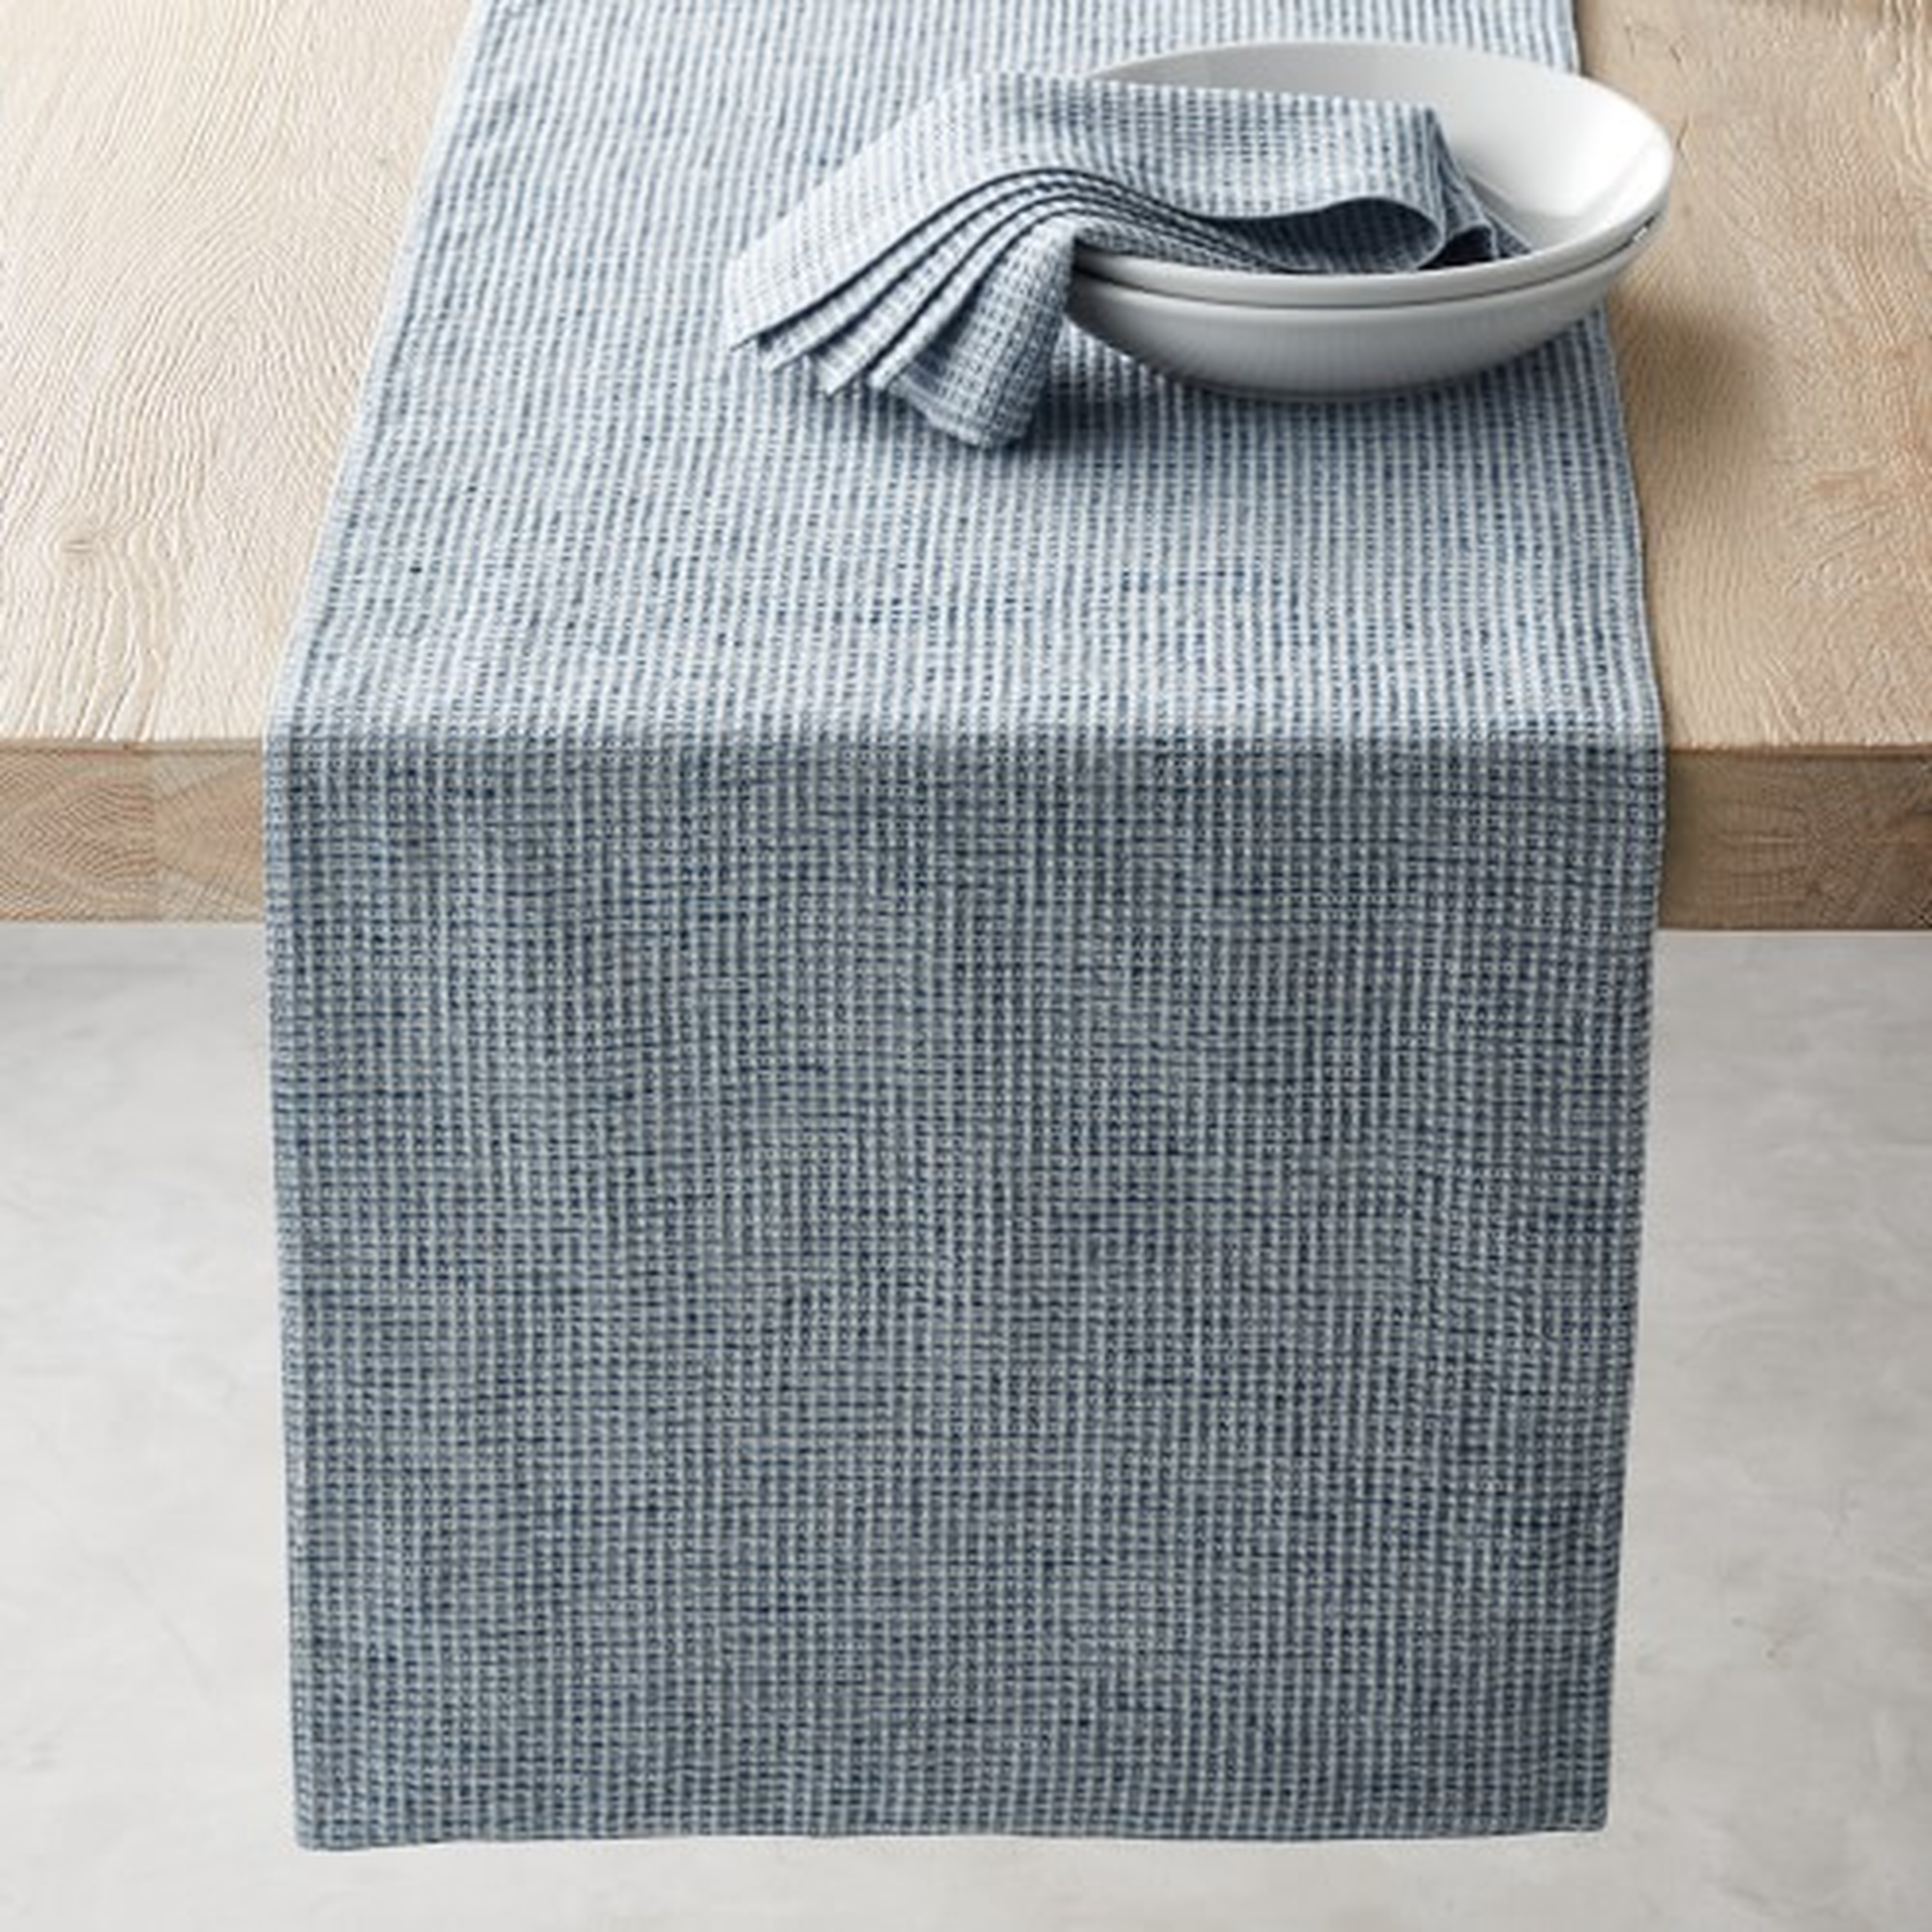 Waffle Weave Table Runner, 16" X 108", Blue - Williams Sonoma